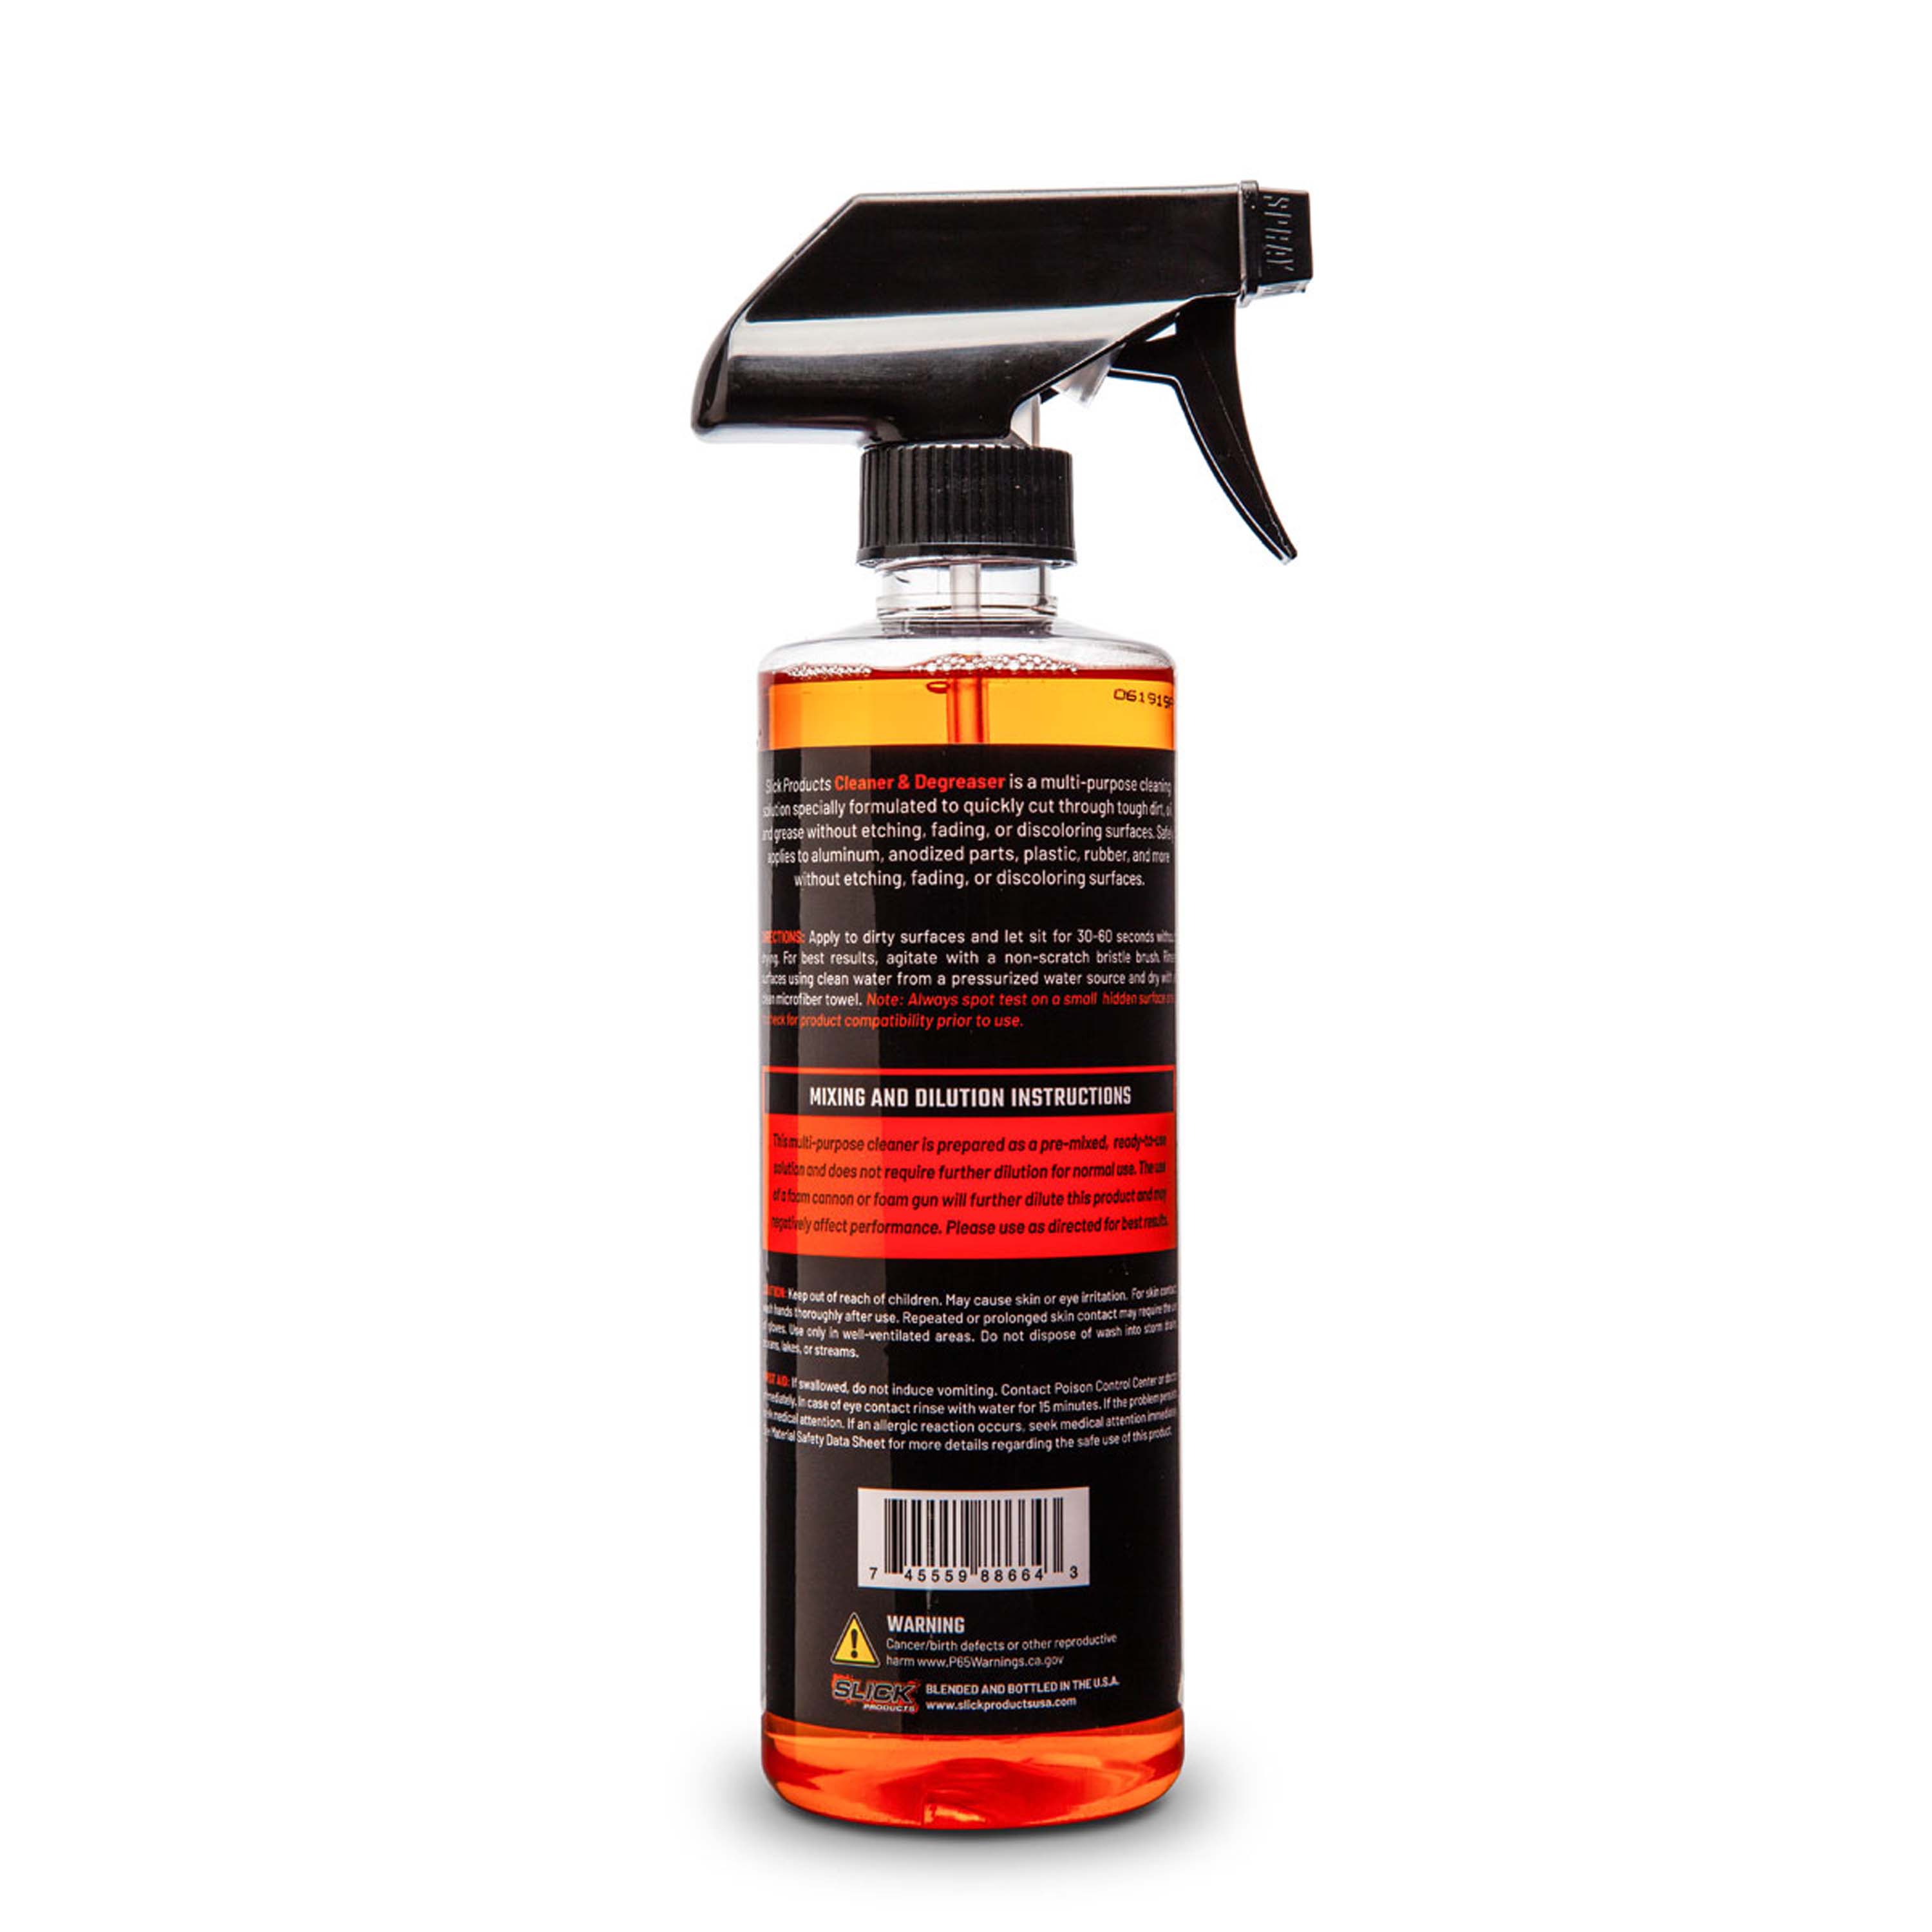 Turtle Wax Bug and Tar Remover Spray - Easily Removes Tough Stains